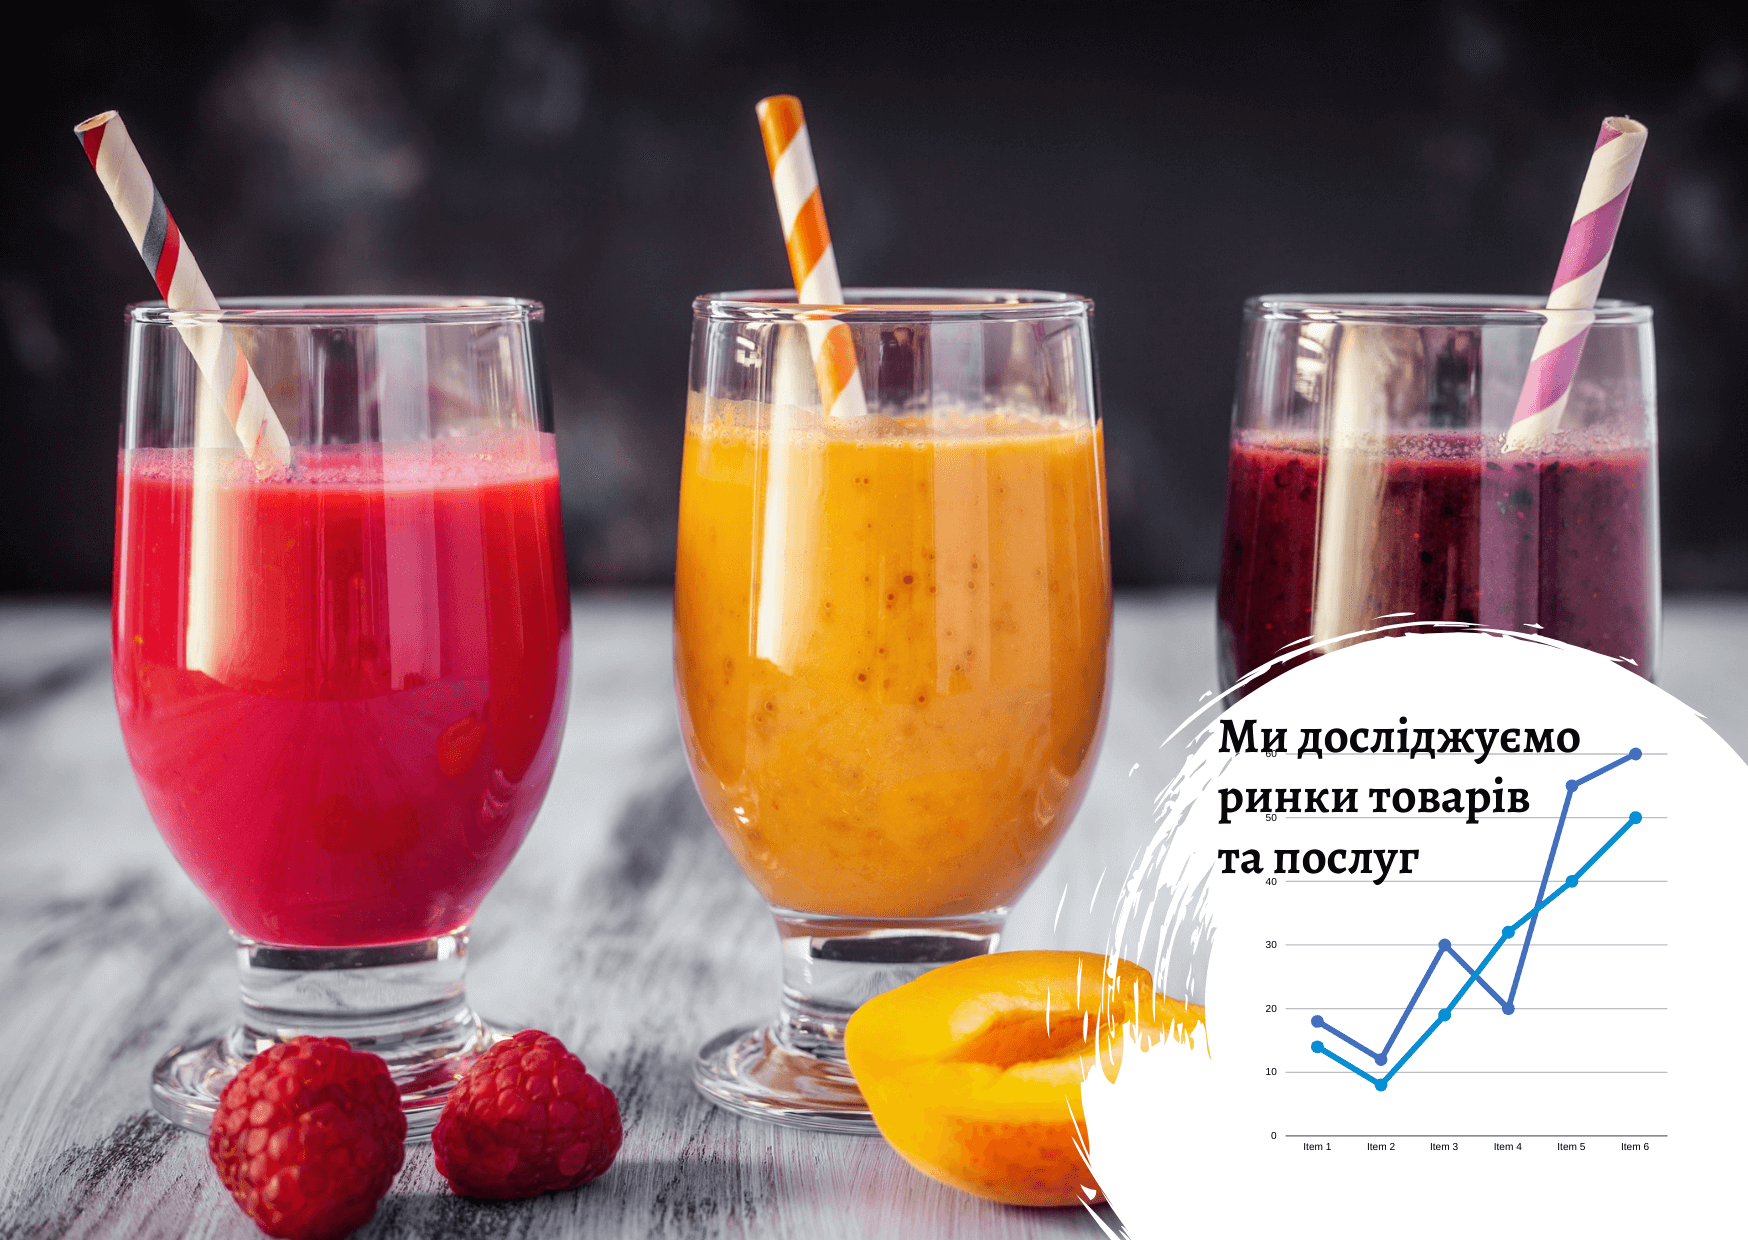 Ukrainian juice, smoothie and fruit puree markets: current situation